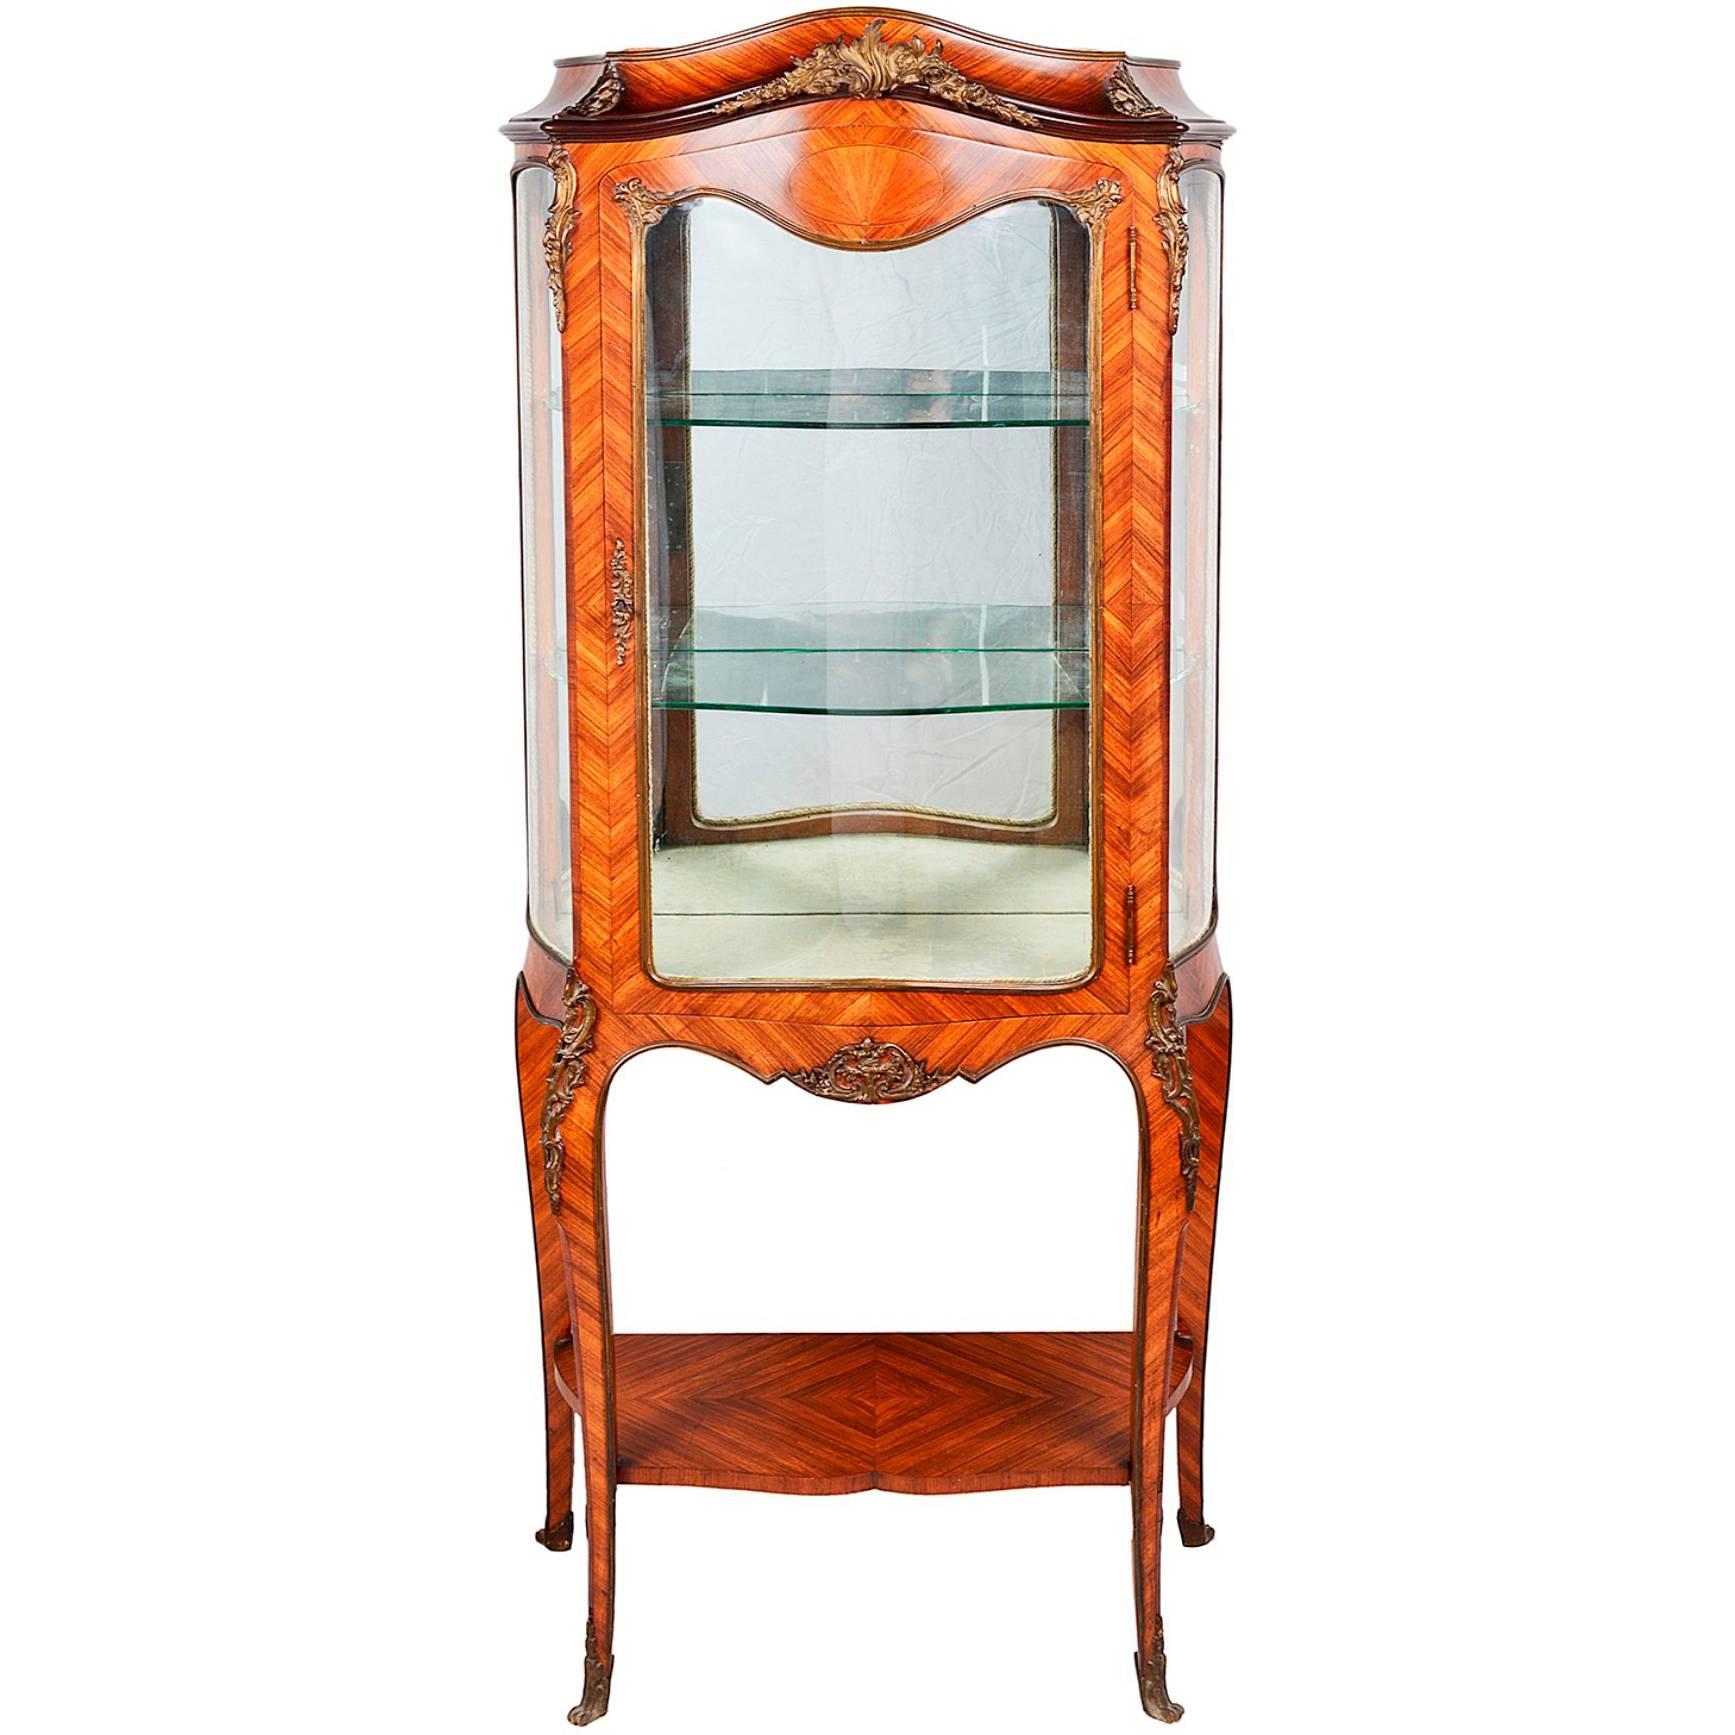 A very good quality late 19th century French kingwood vitrine. Having gilded ormolu mounts, a single glass door, opening to reveal two shelves within. Raised on cabriole legs, terminating in scrolling ormolu feet.